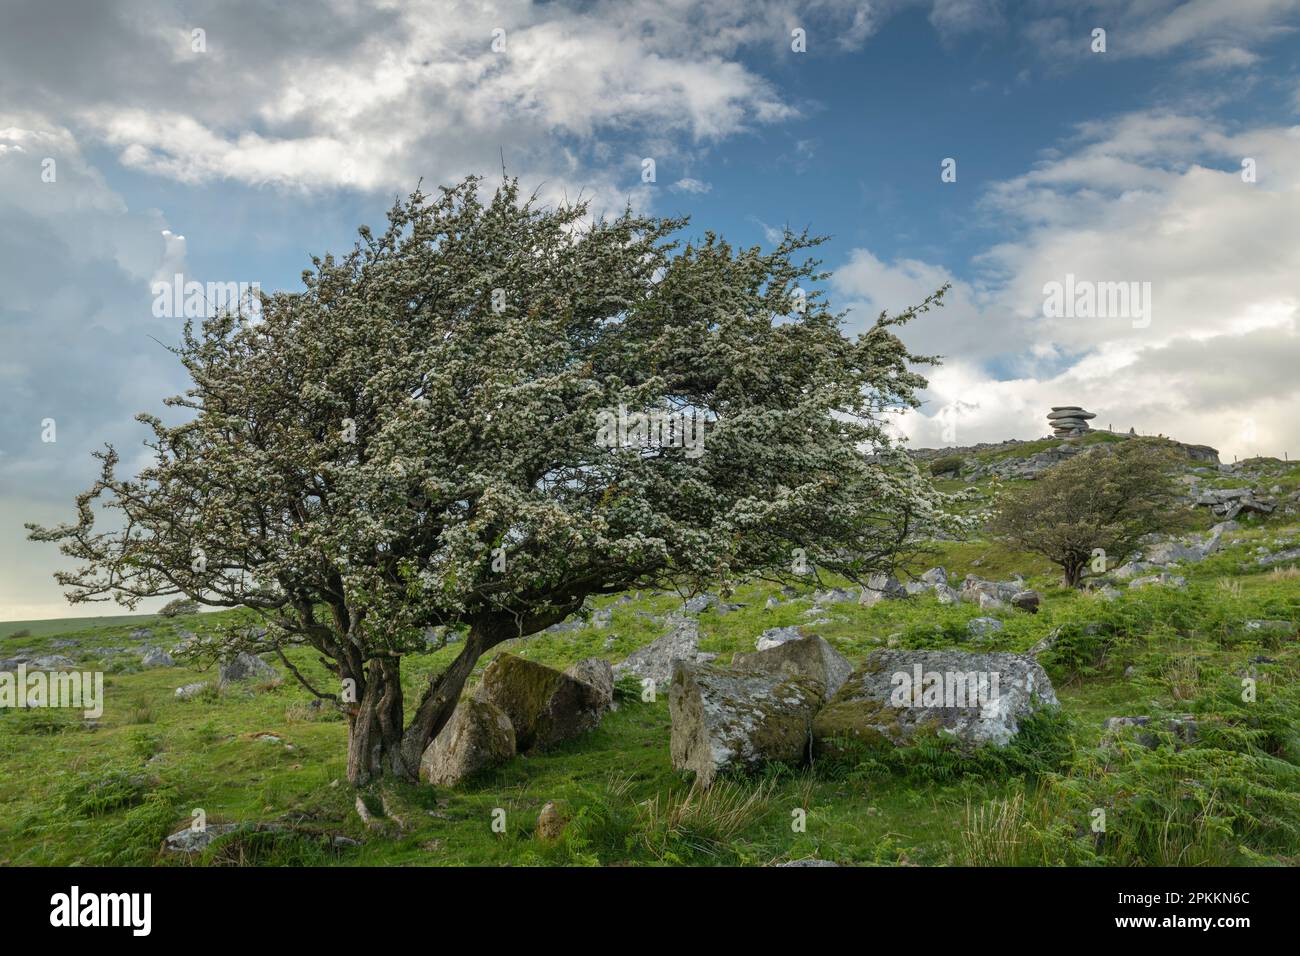 Hawthorn Tree in Blossom, Bodmin Moor, Cornwall, Angleterre, Royaume-Uni, Europe Banque D'Images